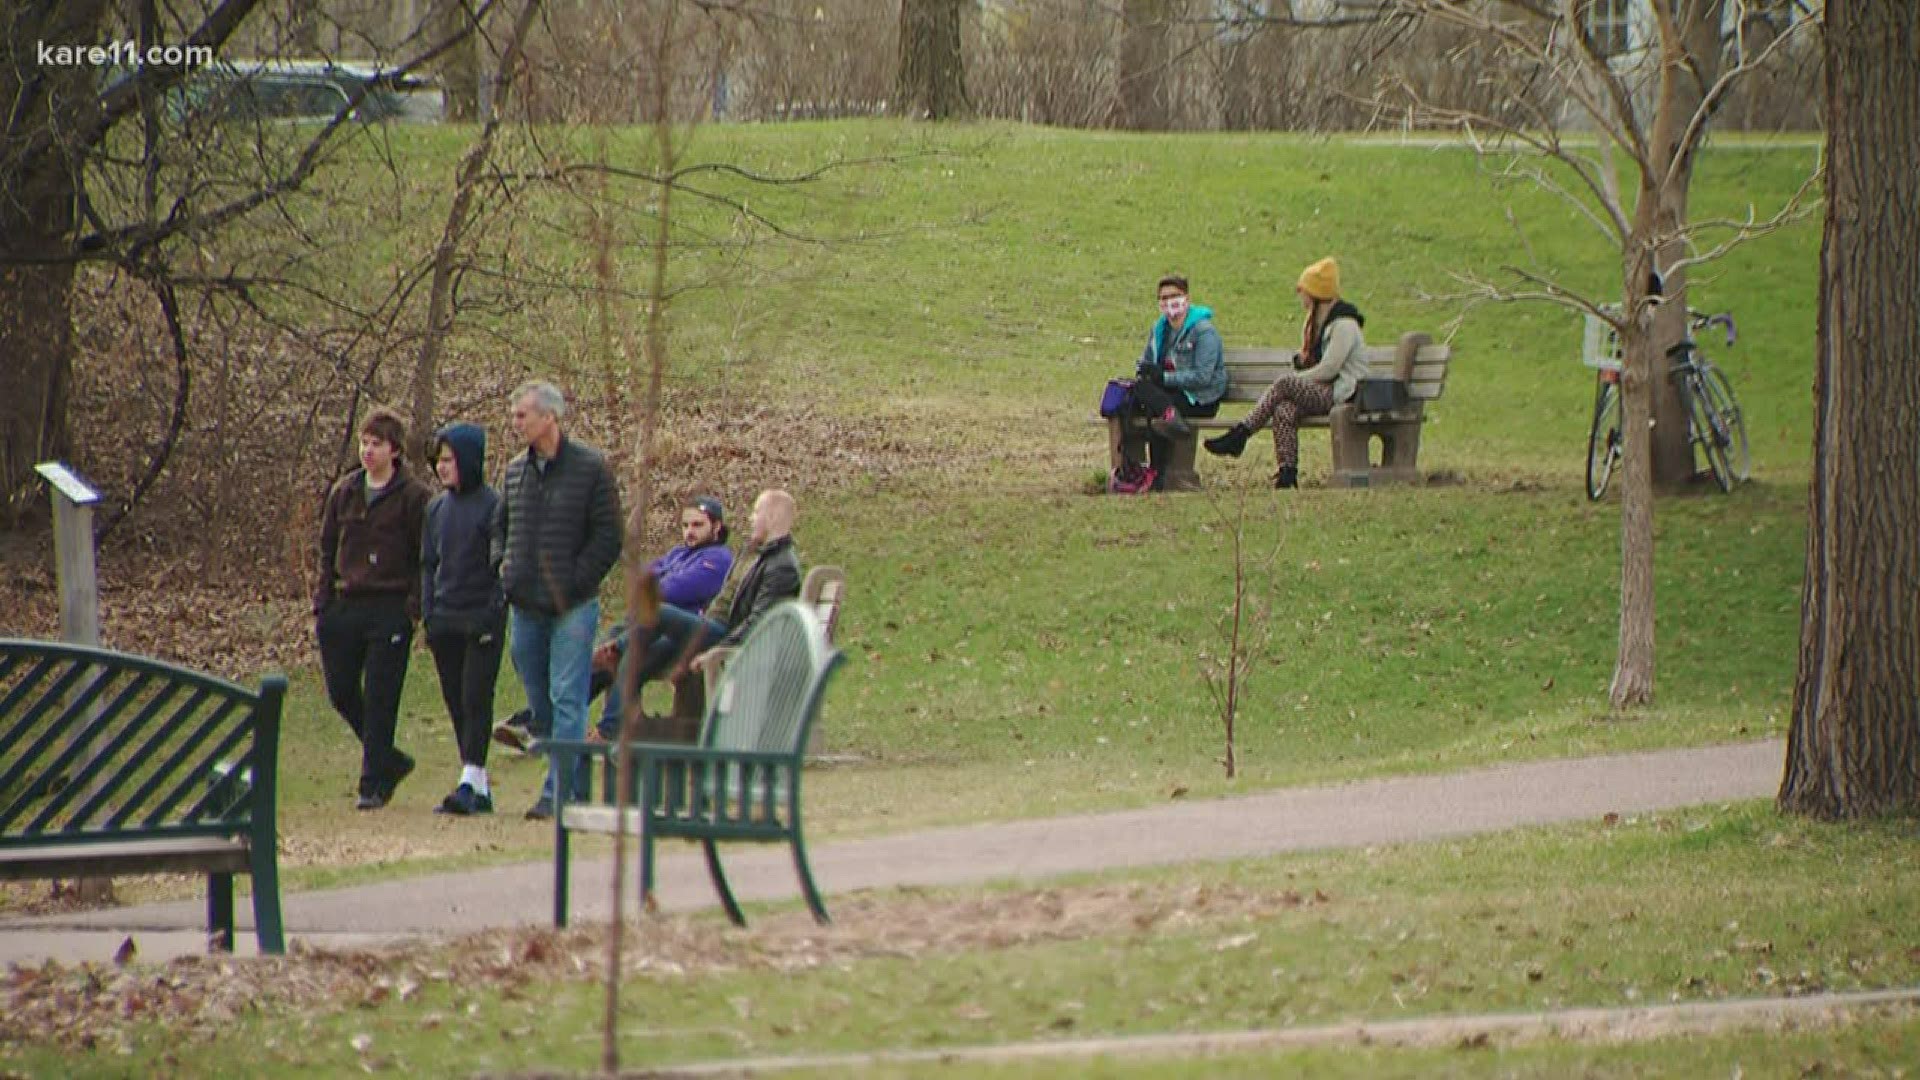 COVID-19 hasn't shut down major parks or trails, but Minneapolis, St. Paul, and other cities are asking that you follow the rules of social distancing.